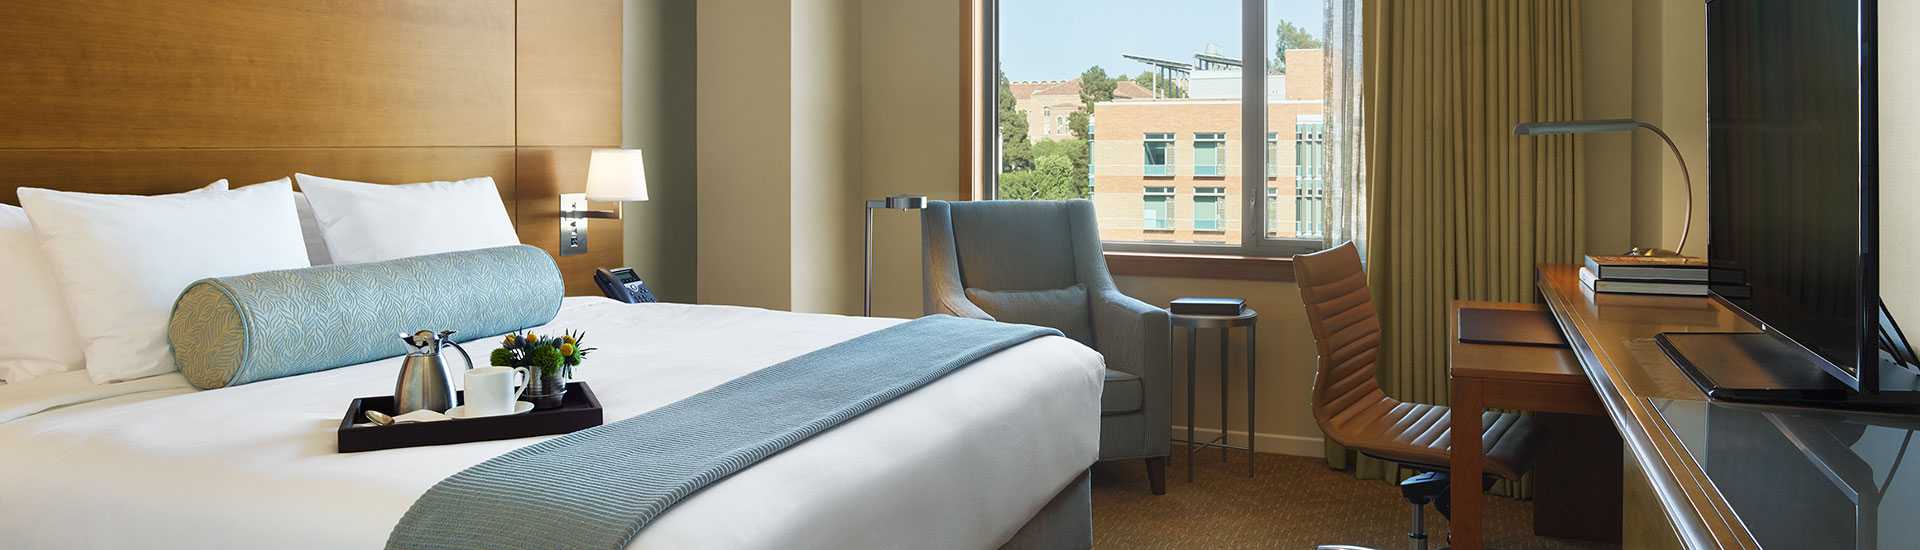 Visit the hotel at UCLA! Find accommodations in Westwood at UCLA.